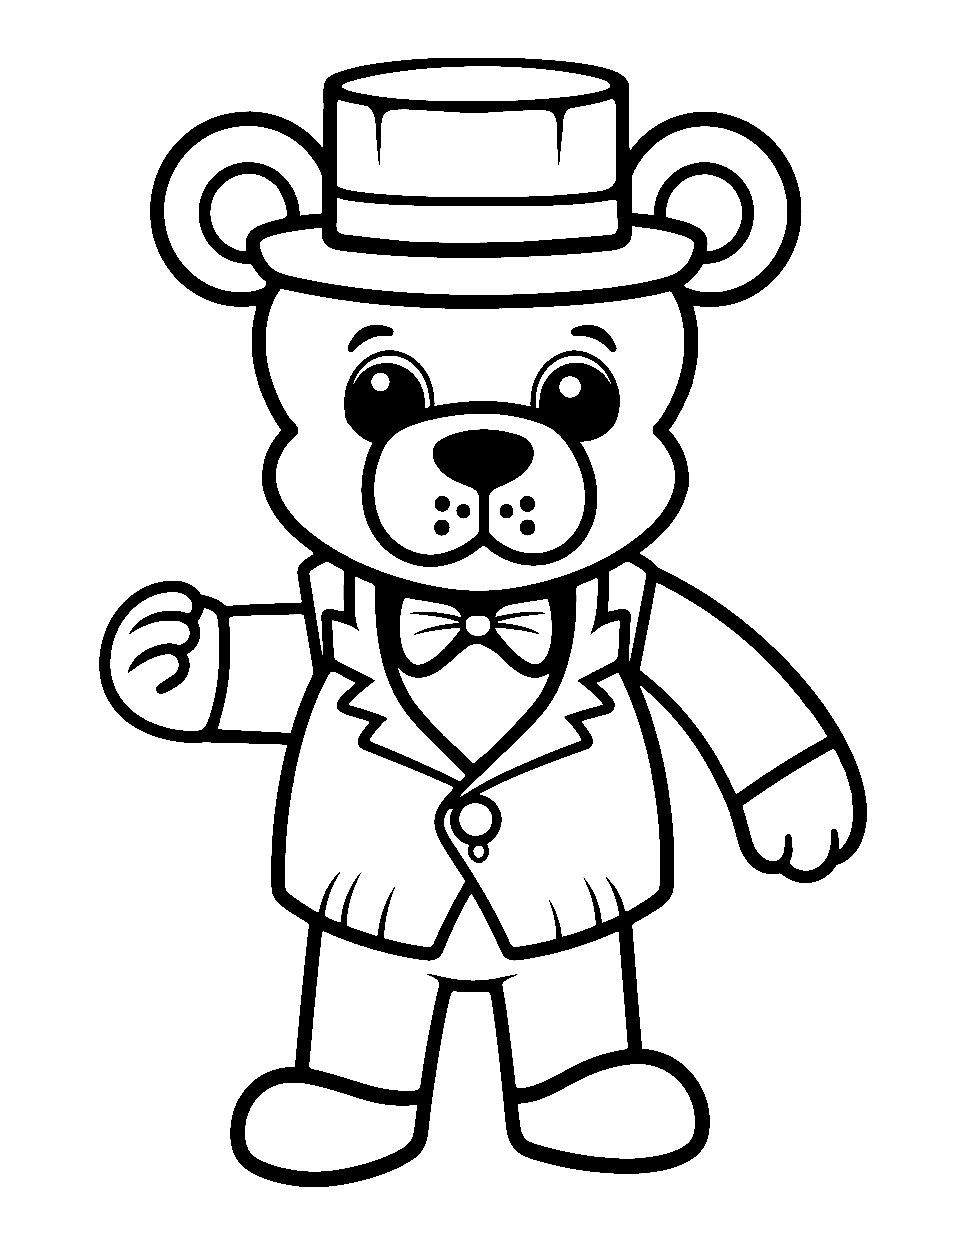 Cool Kawaii Freddy Five Nights at Freddys Coloring Page - Freddy looking cool and kawaii with a simple background.